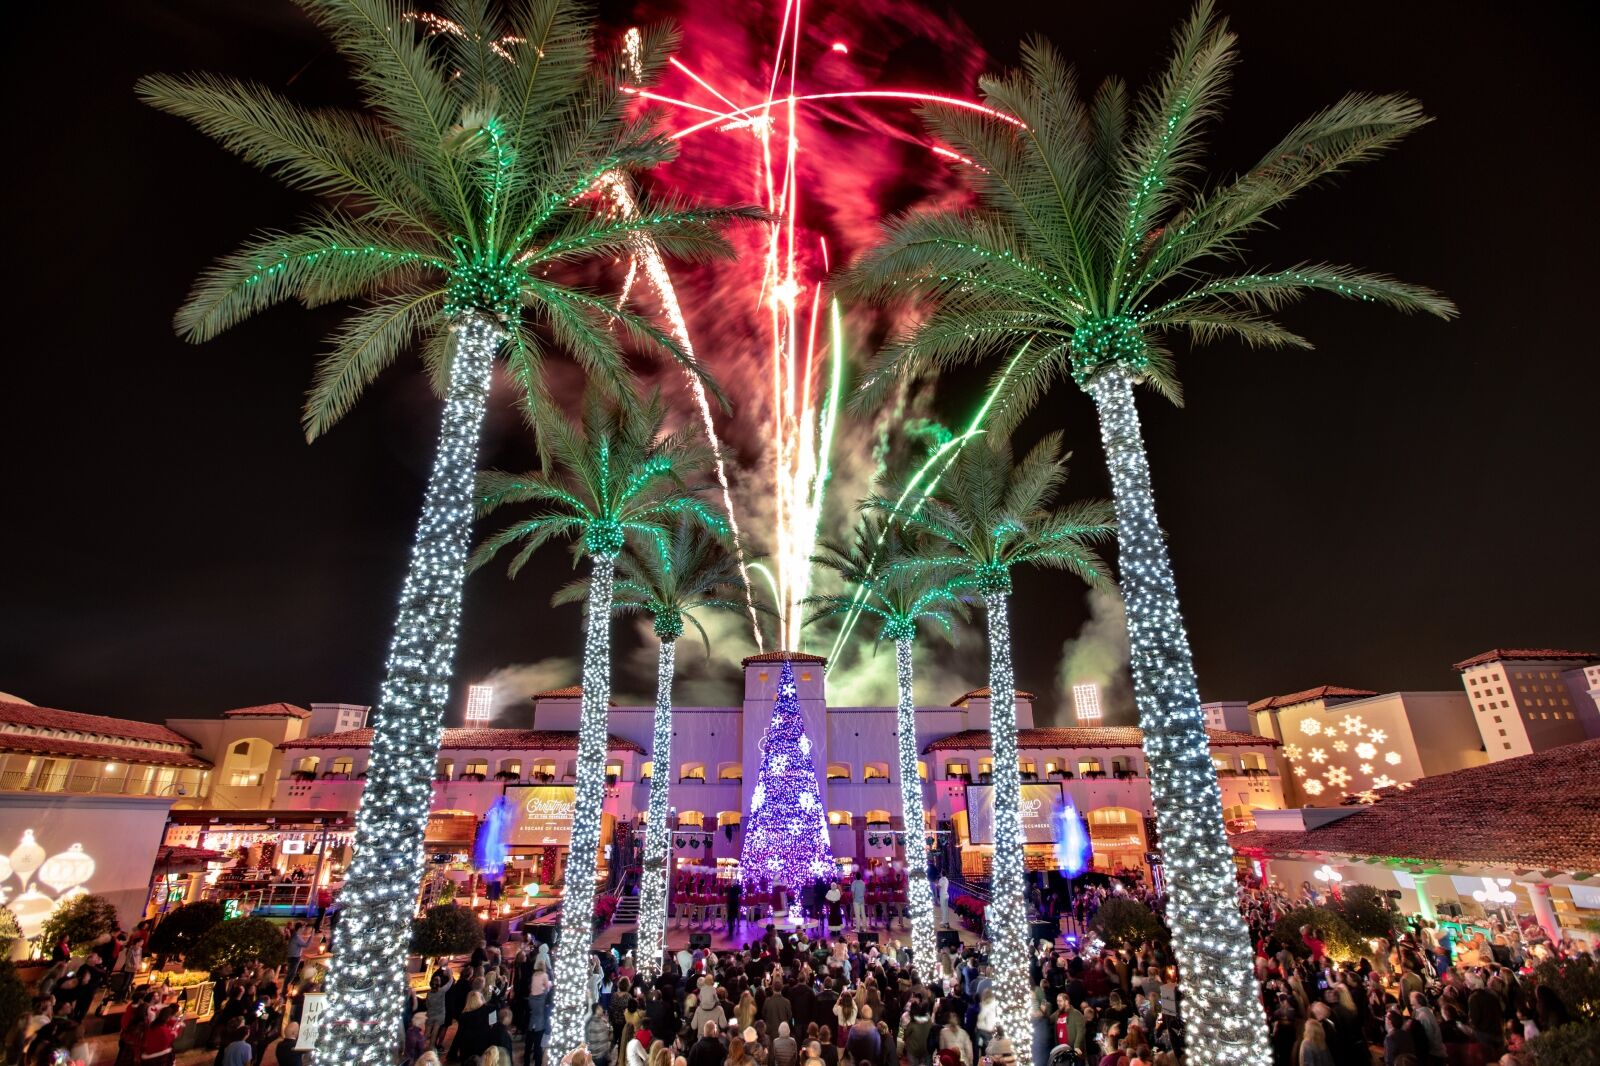 Fairmont Scottsdale at Christmas during tree lighting ceremony 